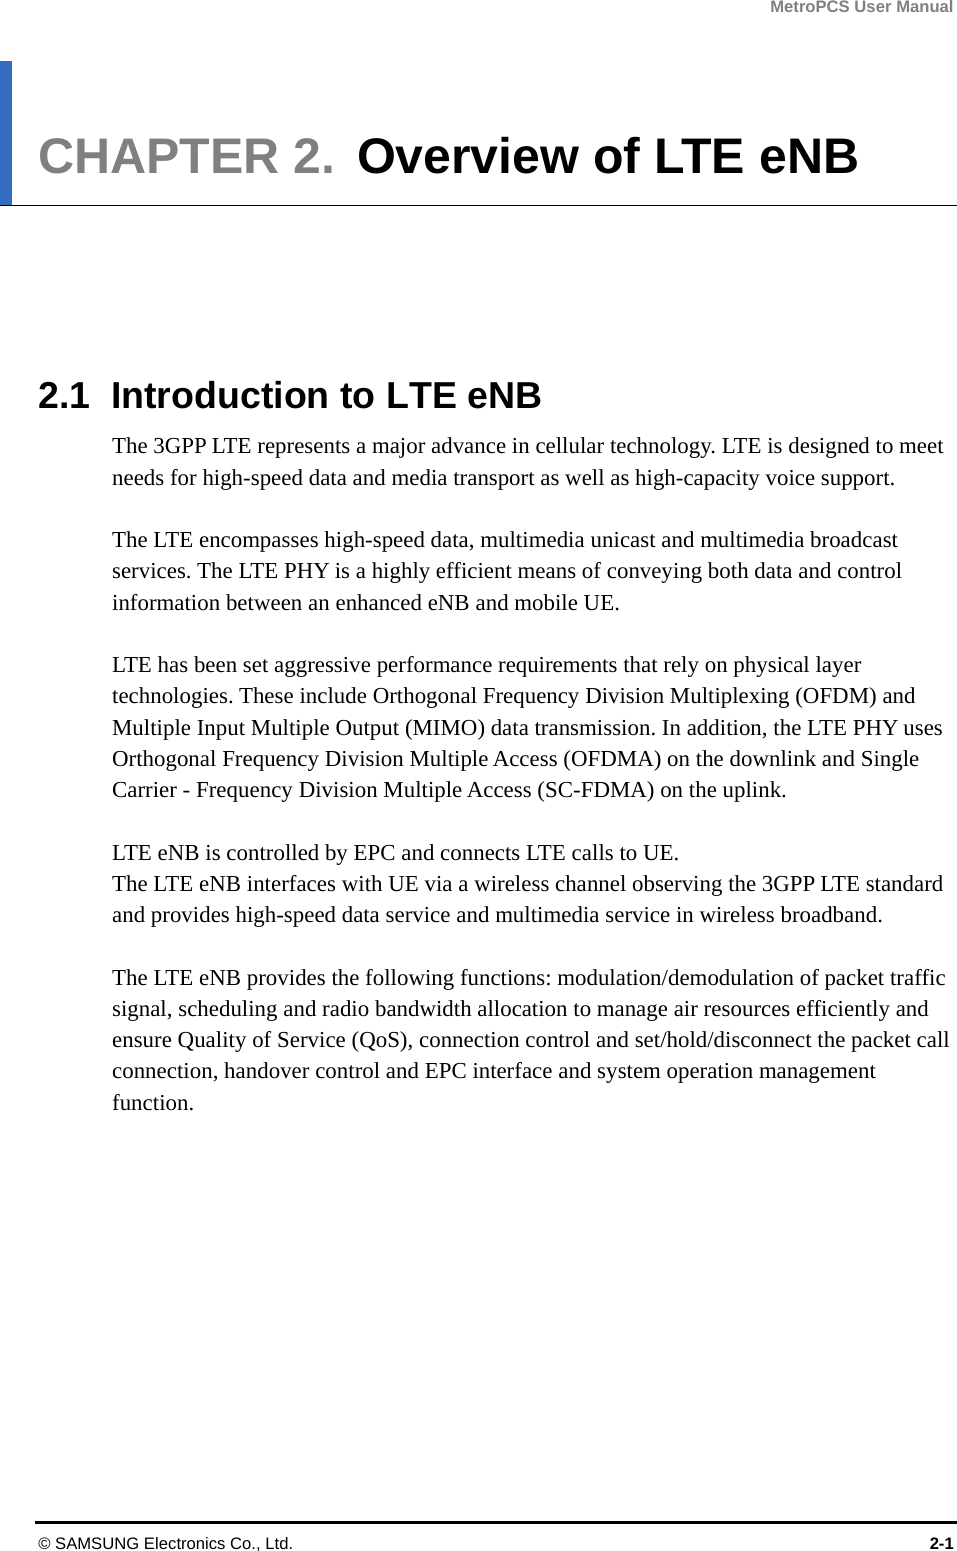 MetroPCS User Manual © SAMSUNG Electronics Co., Ltd.  2-1 CHAPTER 2.  Overview of LTE eNB      2.1  Introduction to LTE eNB The 3GPP LTE represents a major advance in cellular technology. LTE is designed to meet needs for high-speed data and media transport as well as high-capacity voice support.  The LTE encompasses high-speed data, multimedia unicast and multimedia broadcast services. The LTE PHY is a highly efficient means of conveying both data and control information between an enhanced eNB and mobile UE.    LTE has been set aggressive performance requirements that rely on physical layer technologies. These include Orthogonal Frequency Division Multiplexing (OFDM) and Multiple Input Multiple Output (MIMO) data transmission. In addition, the LTE PHY uses Orthogonal Frequency Division Multiple Access (OFDMA) on the downlink and Single Carrier - Frequency Division Multiple Access (SC-FDMA) on the uplink.    LTE eNB is controlled by EPC and connects LTE calls to UE.   The LTE eNB interfaces with UE via a wireless channel observing the 3GPP LTE standard and provides high-speed data service and multimedia service in wireless broadband.  The LTE eNB provides the following functions: modulation/demodulation of packet traffic signal, scheduling and radio bandwidth allocation to manage air resources efficiently and ensure Quality of Service (QoS), connection control and set/hold/disconnect the packet call connection, handover control and EPC interface and system operation management function. 